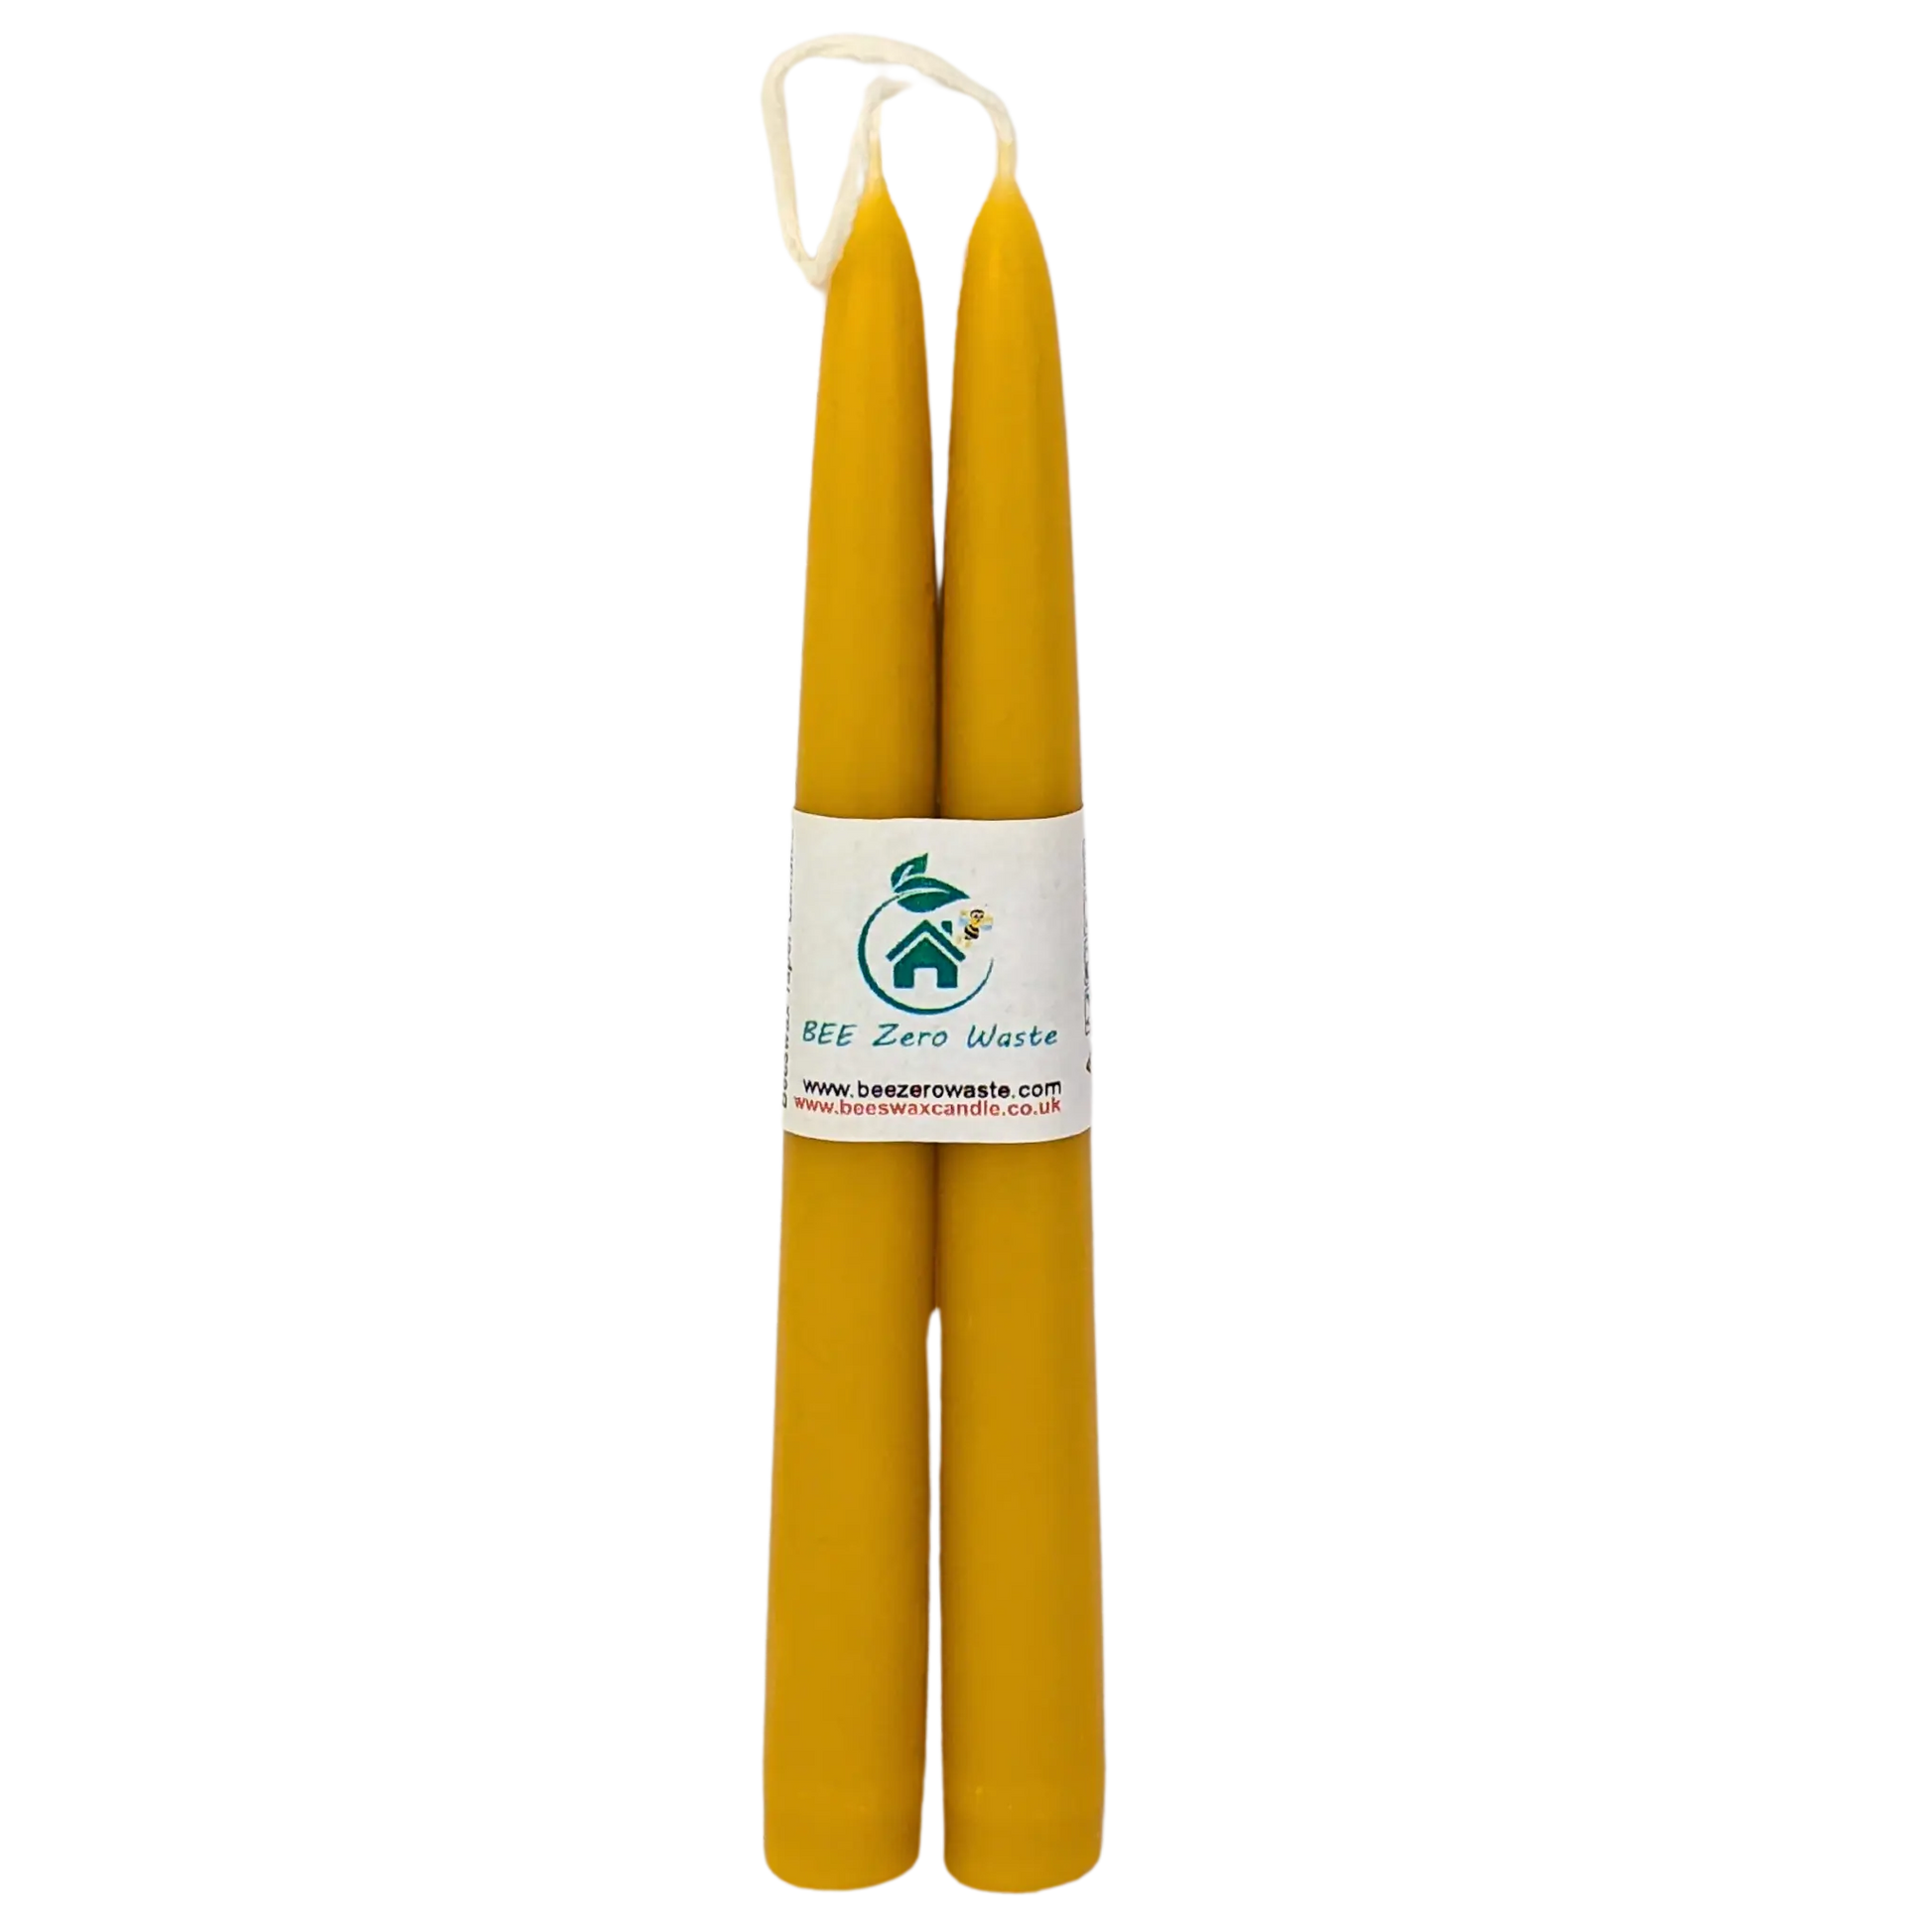 Long-Lasting  Beeswax Candles for Christian Liturgy and Sacred Spaces.